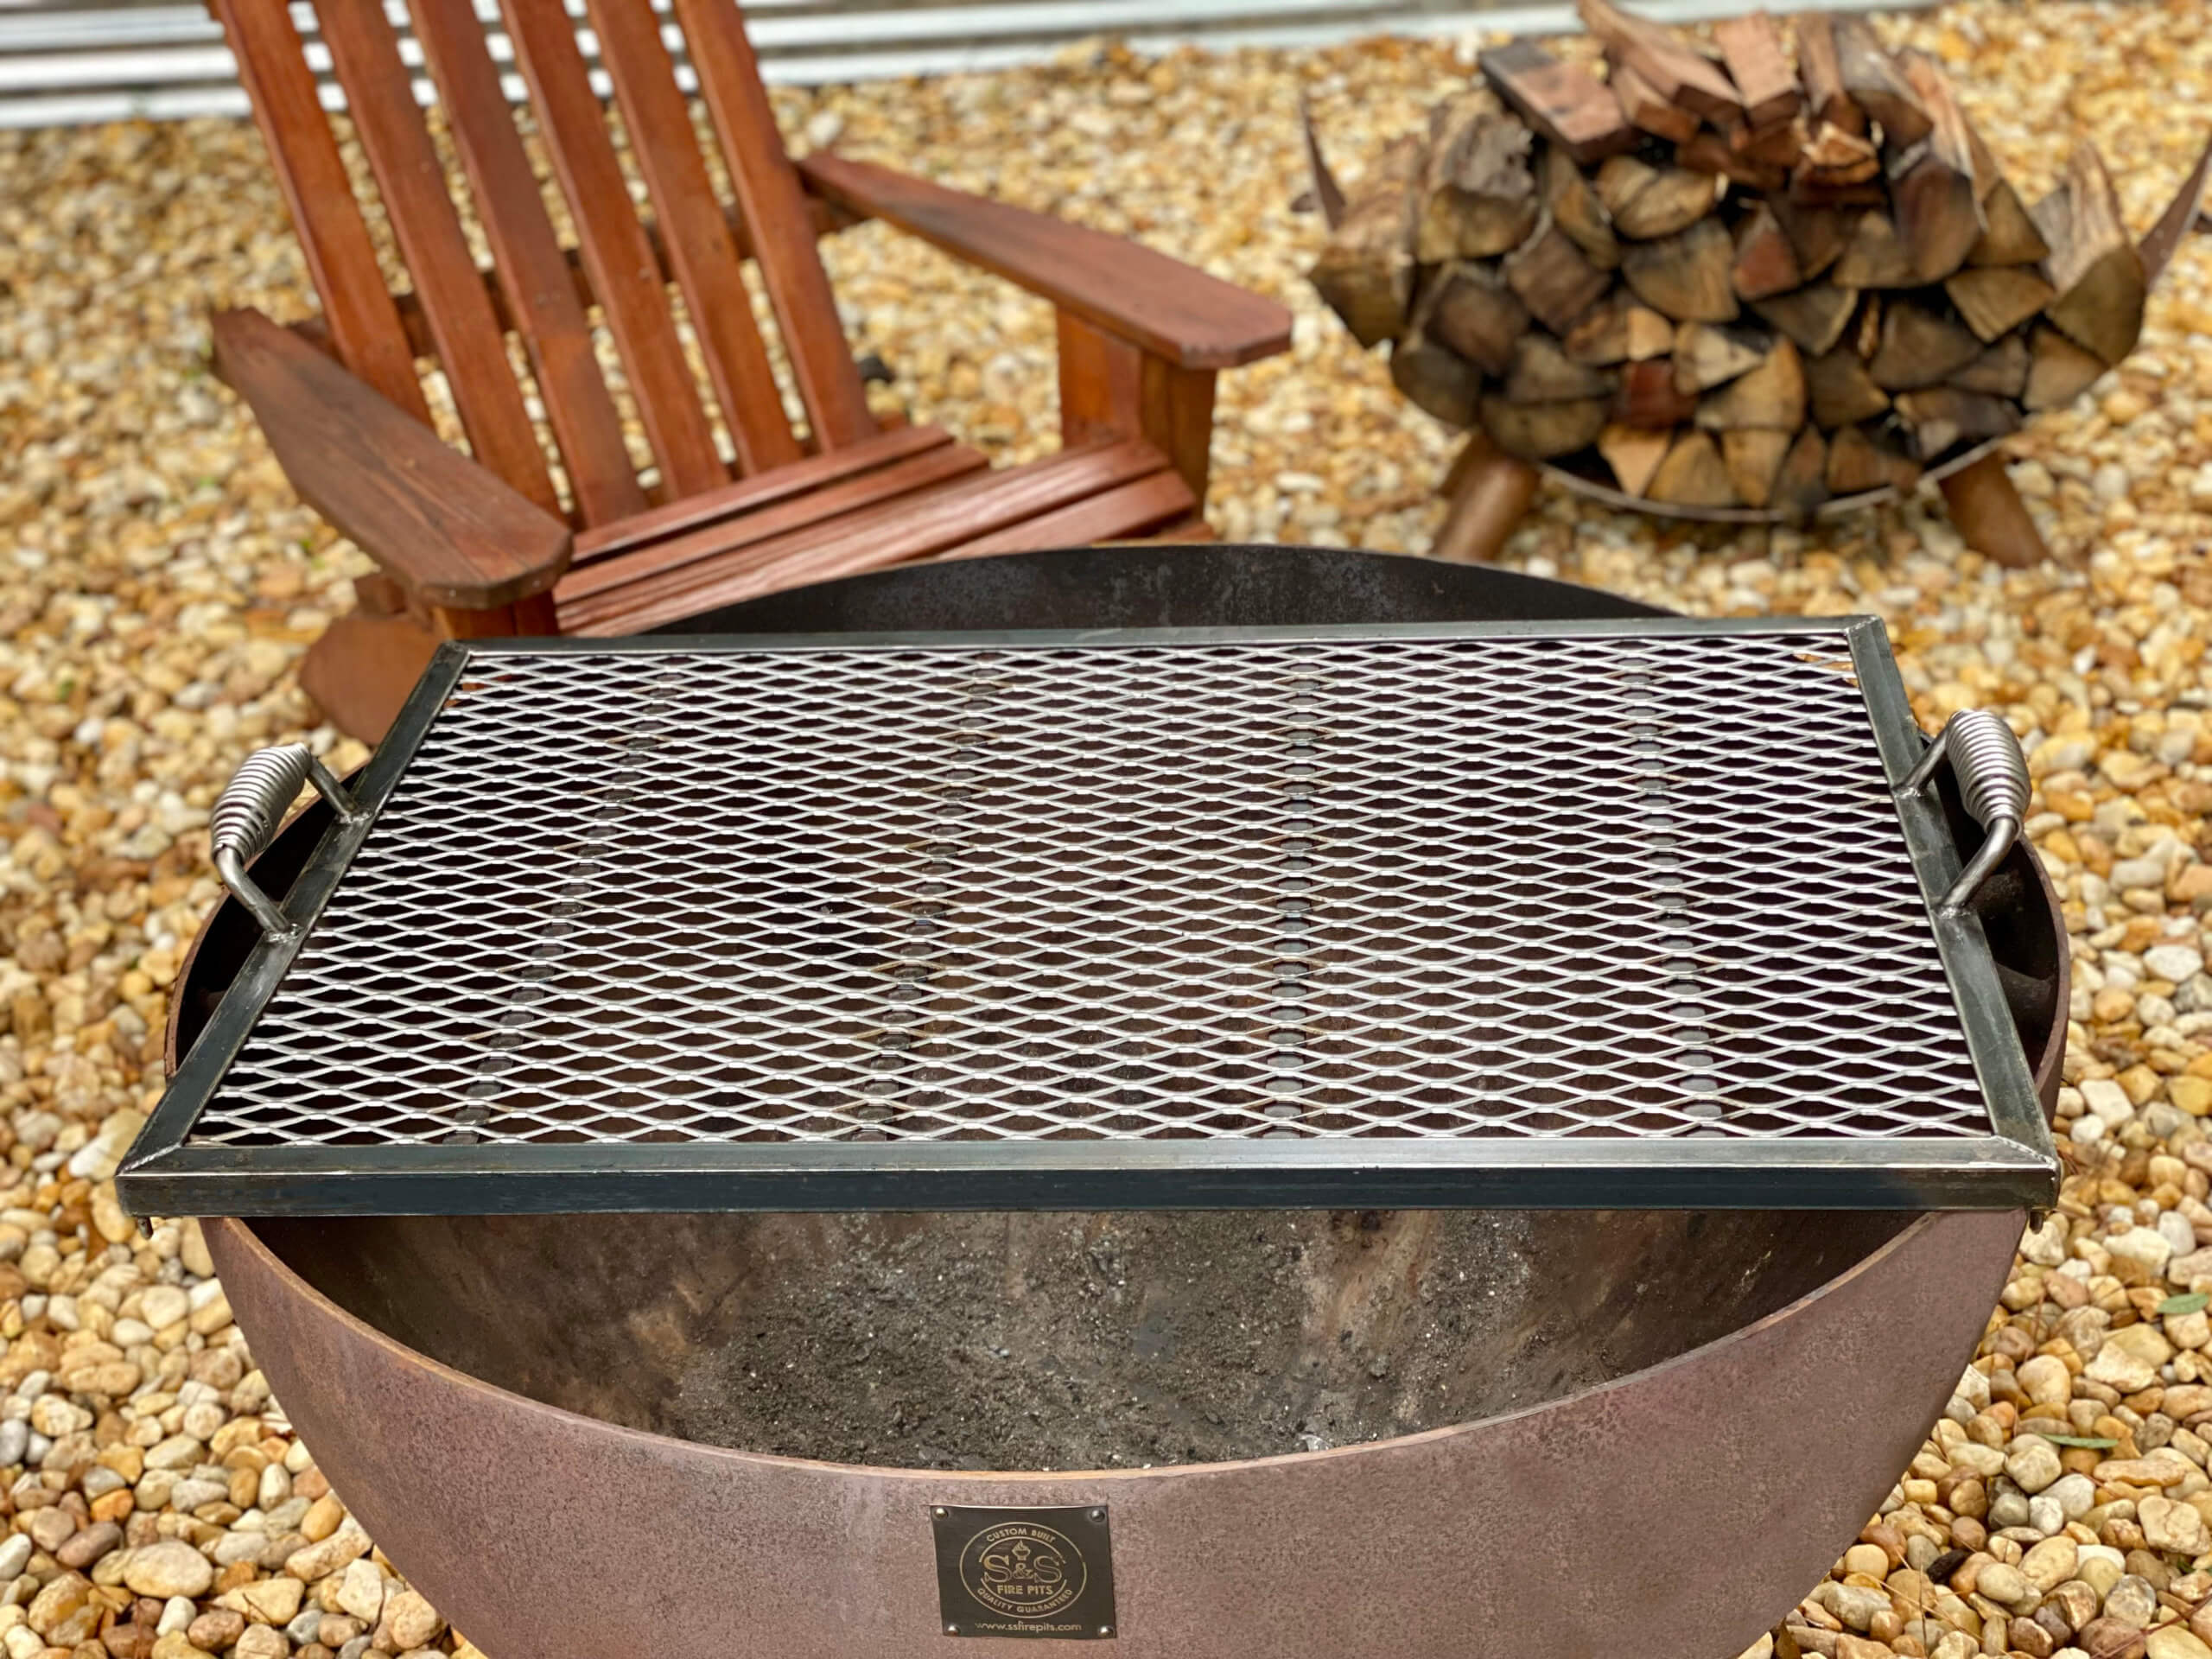 41 Heavy Duty Handcrafted Fire Pit, Fire Pit Kit With Cooking Grate